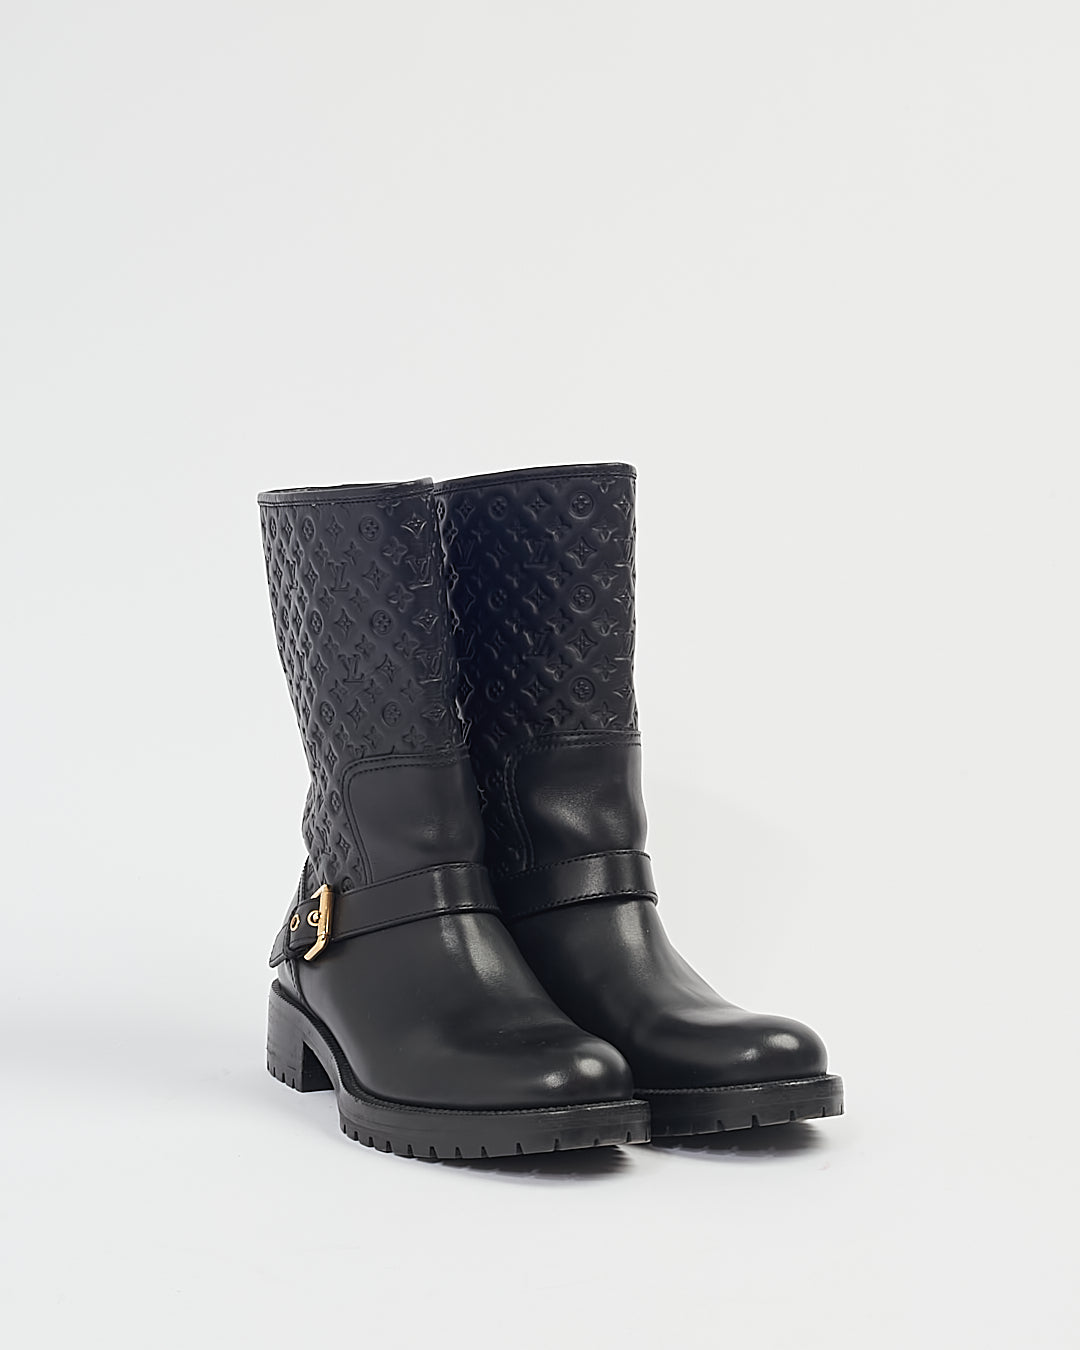 Louis Vuitton Black Smooth Leather Monogram Buckle Boots - 8